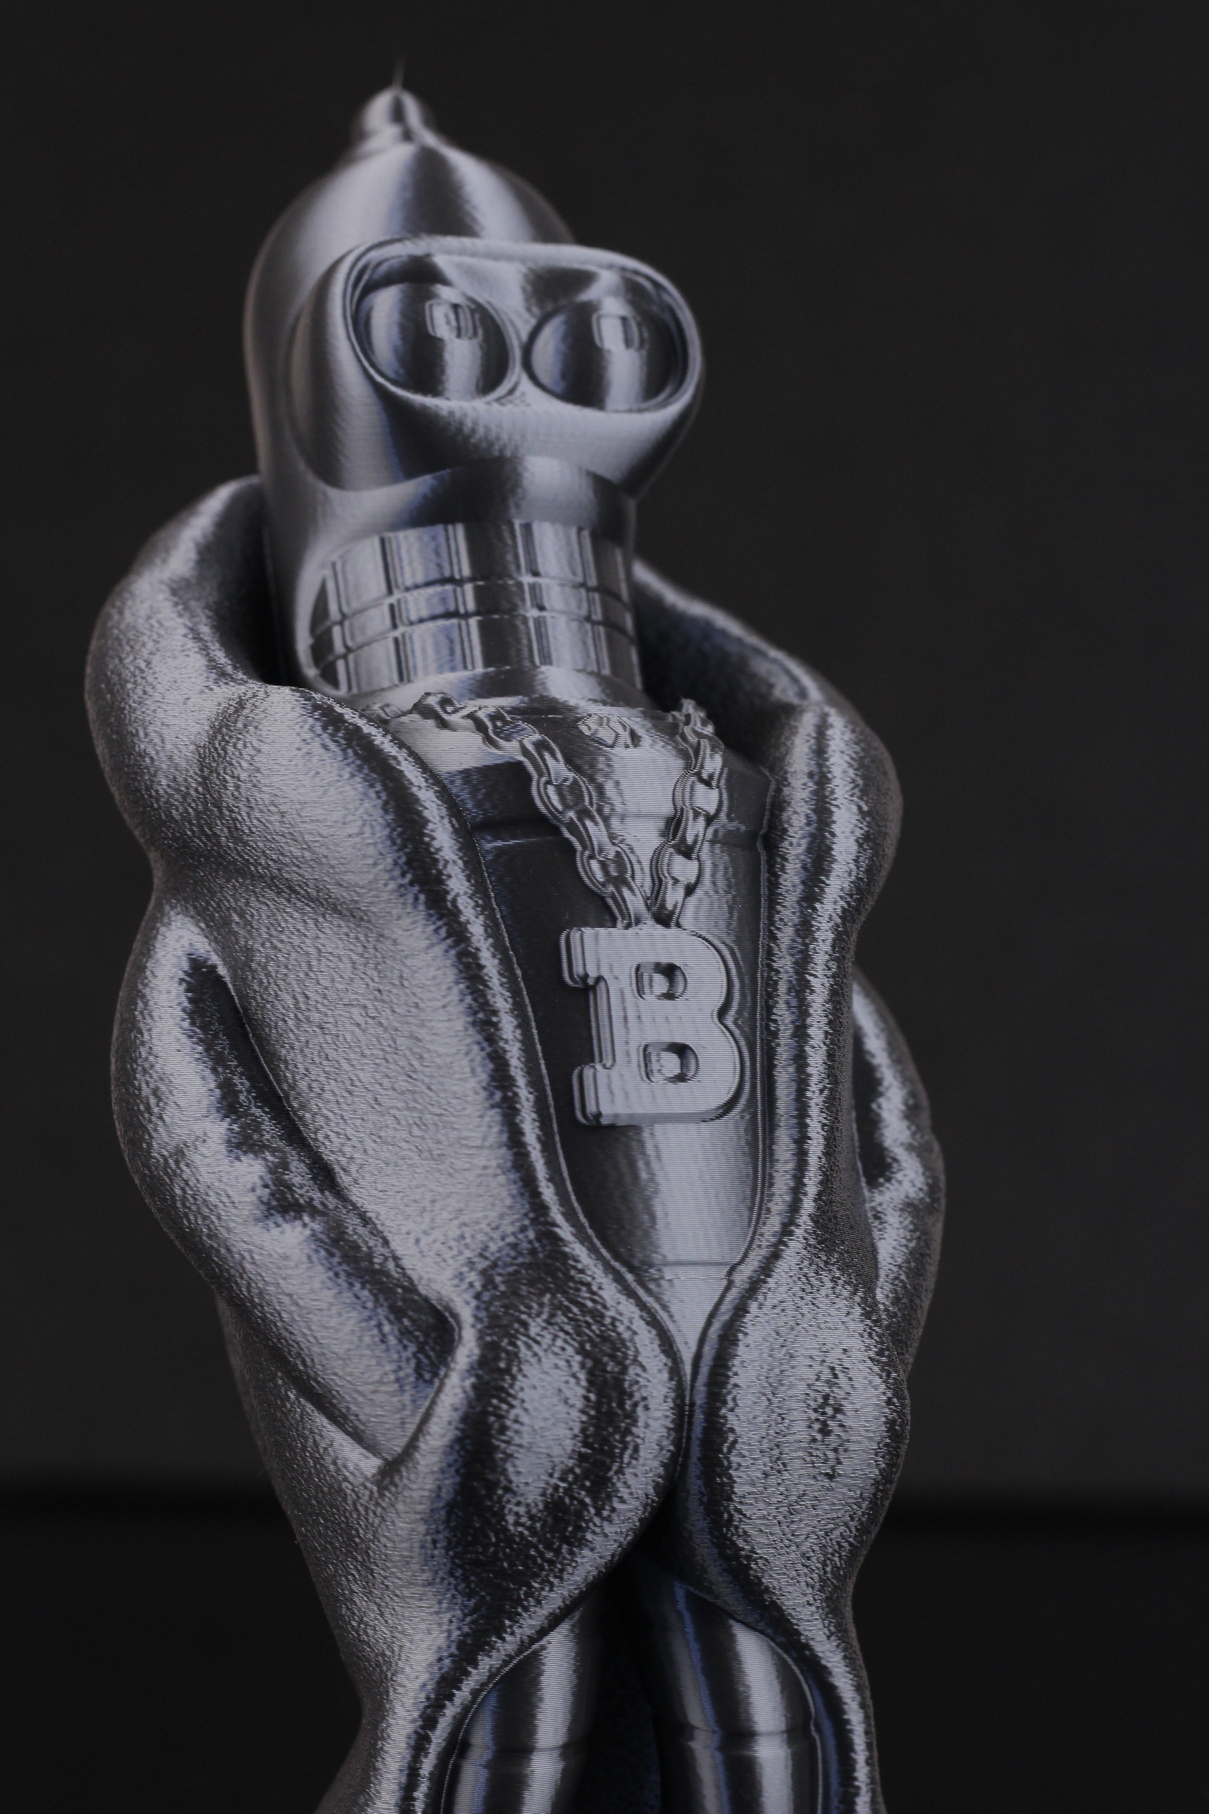 Bender printed on BIQU B1 SE Plus 1 | BIQU B1 SE PLUS Review: SKR 2 and ABL from Factory